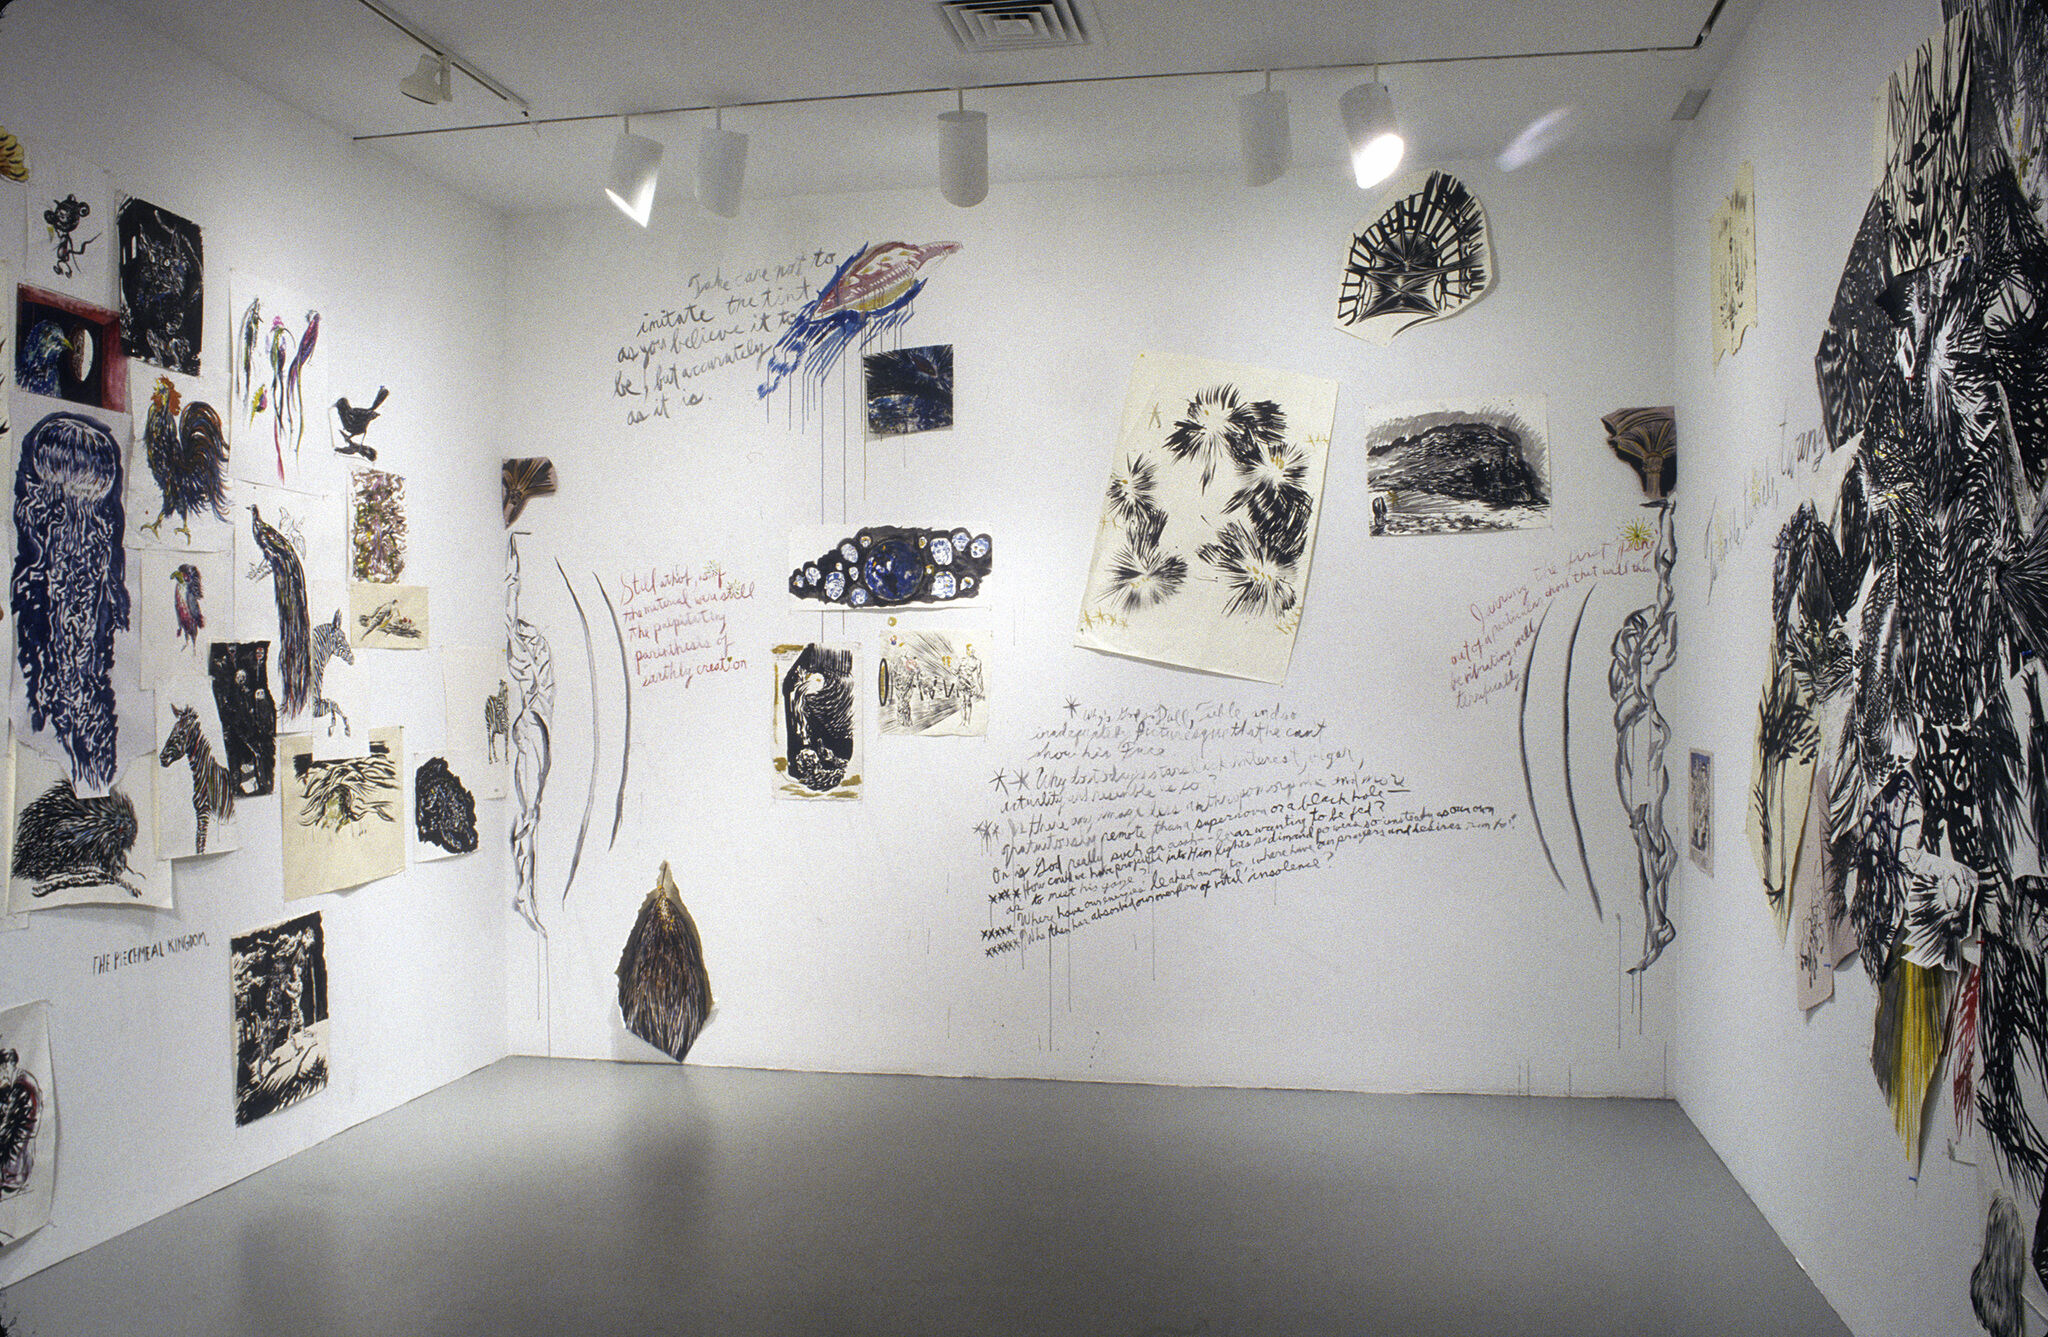 Walls covered in handwritten notes and drawings.